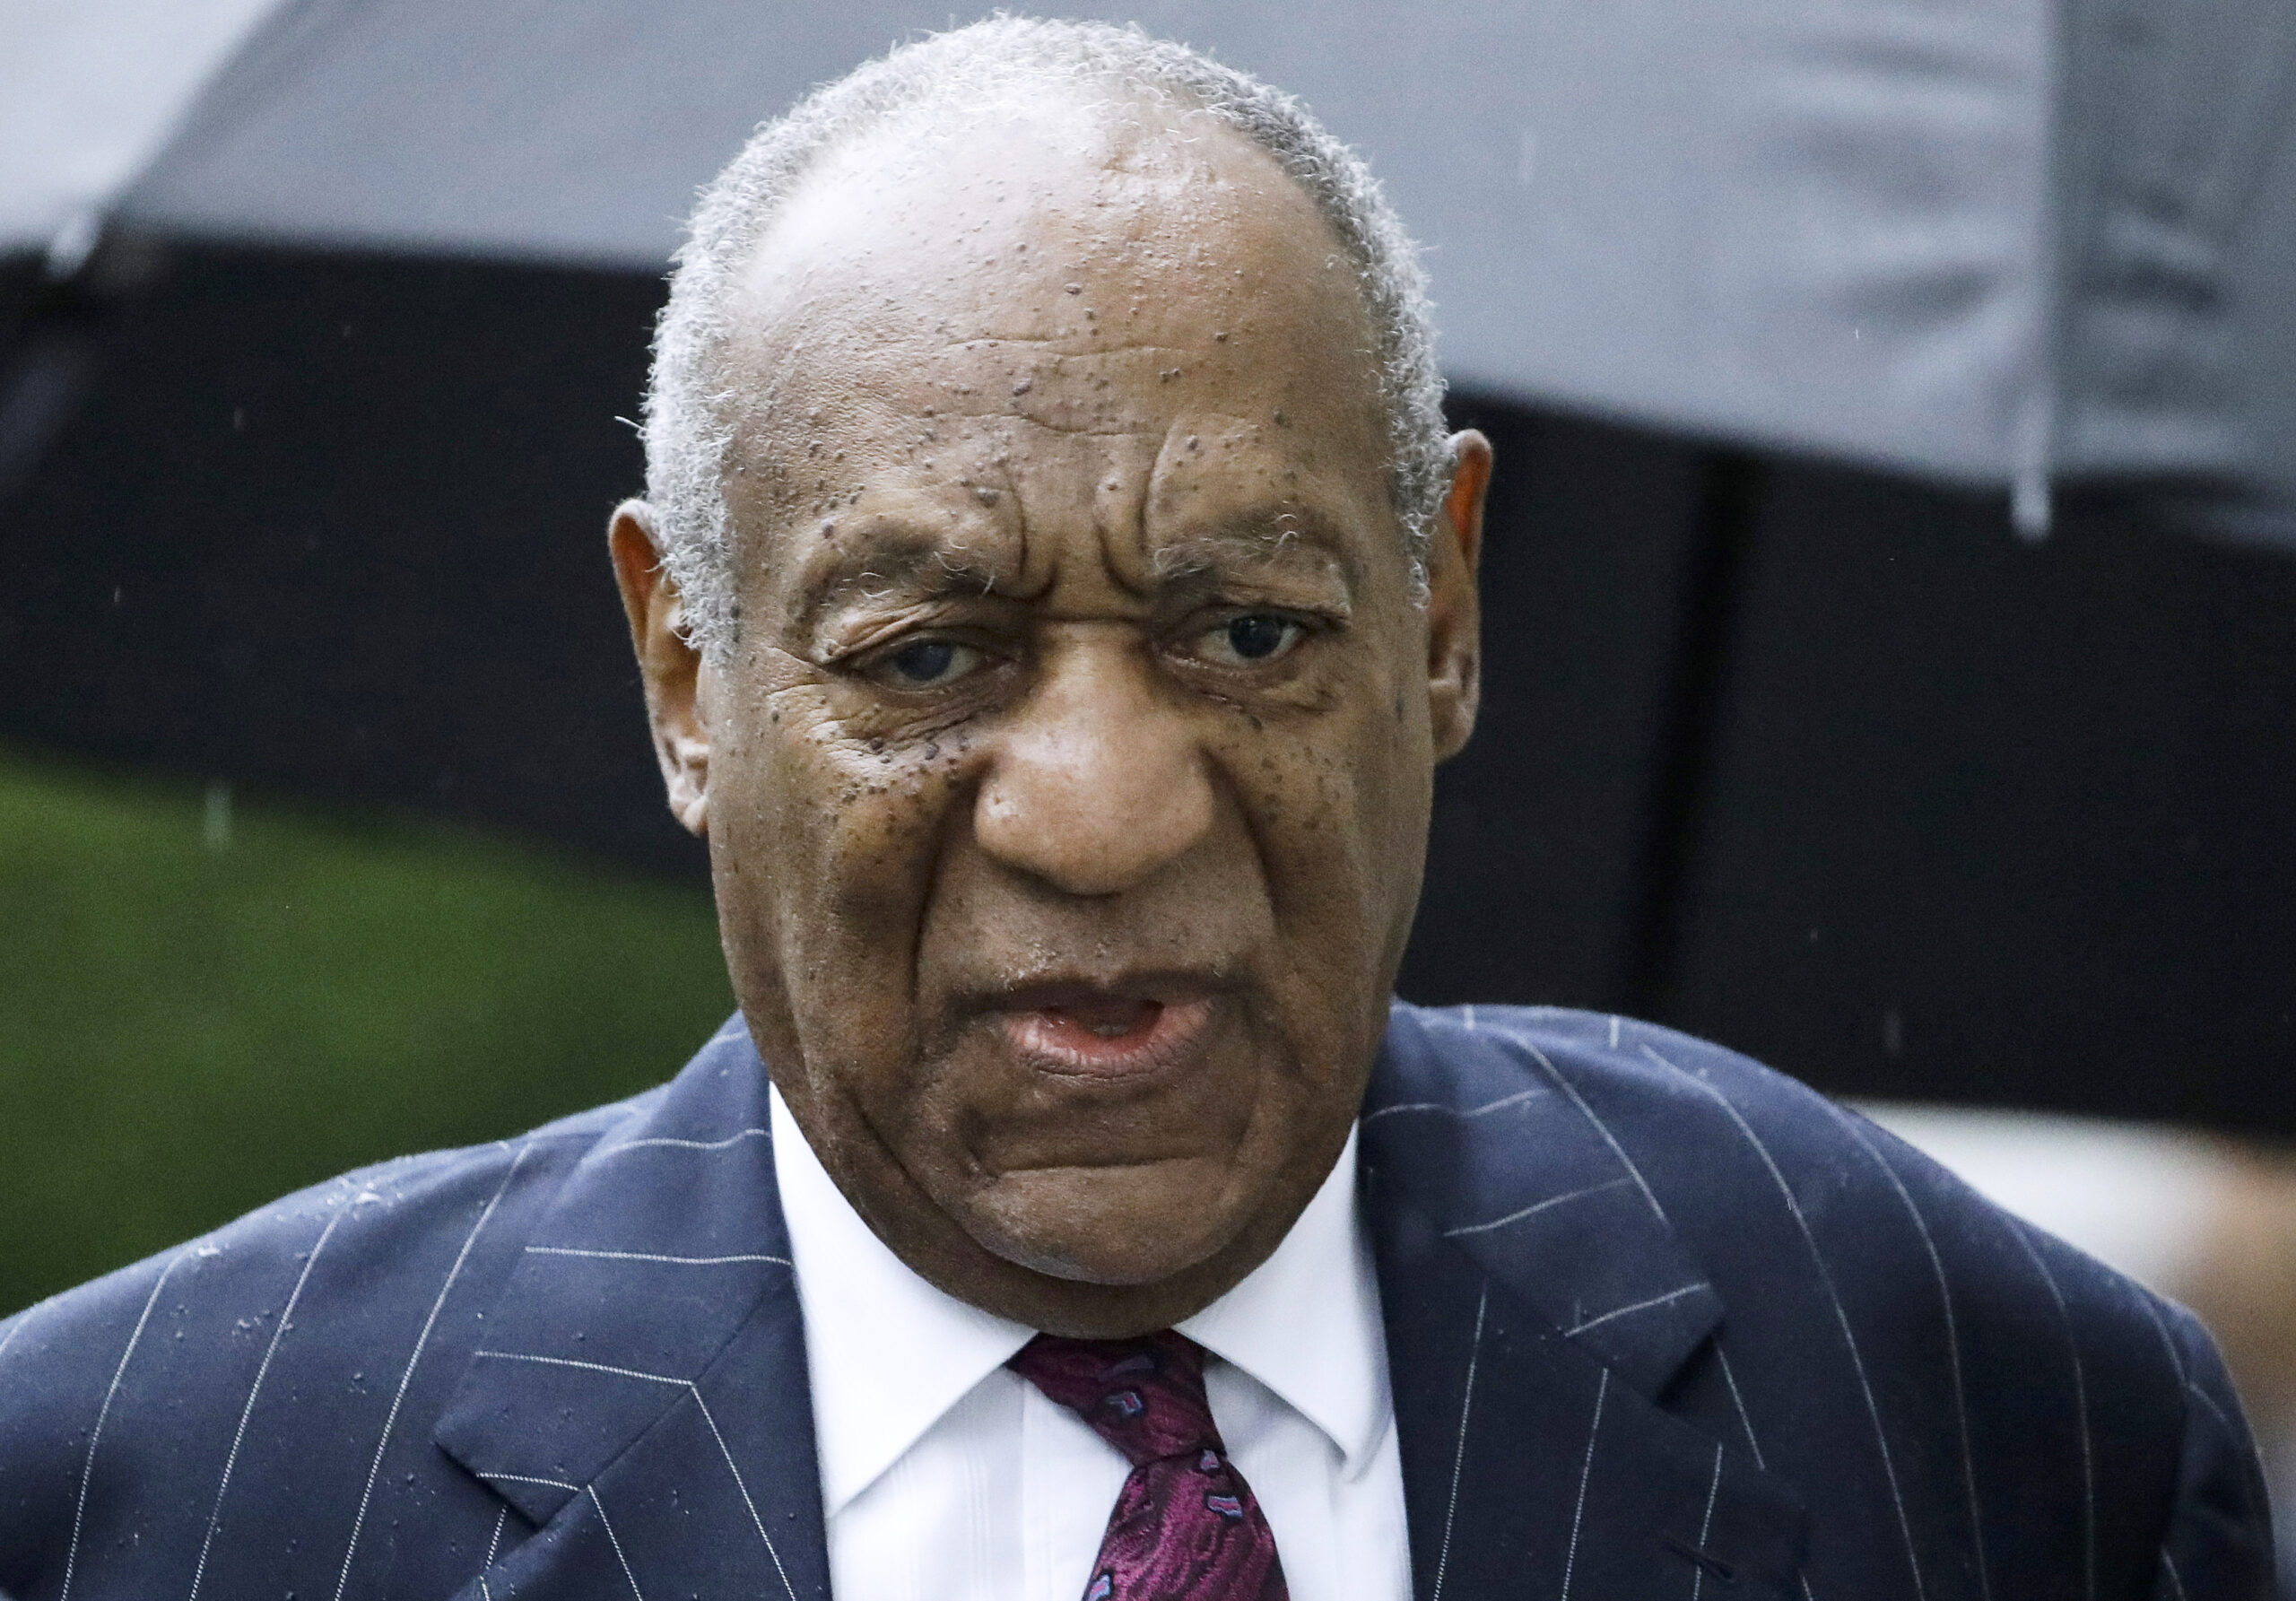 FILE - Bill Cosby arrives for a sentencing hearing following his sexual assault conviction at the Montgomery County Courthouse in Norristown Pa., on Sept. 25, 2018. Jurors at a civil trial found Tuesday, June 21, 2022, that Cosby sexually abused a 16-year-old girl at the Playboy Mansion in 1975. (AP Photo/Matt Rourke, File)